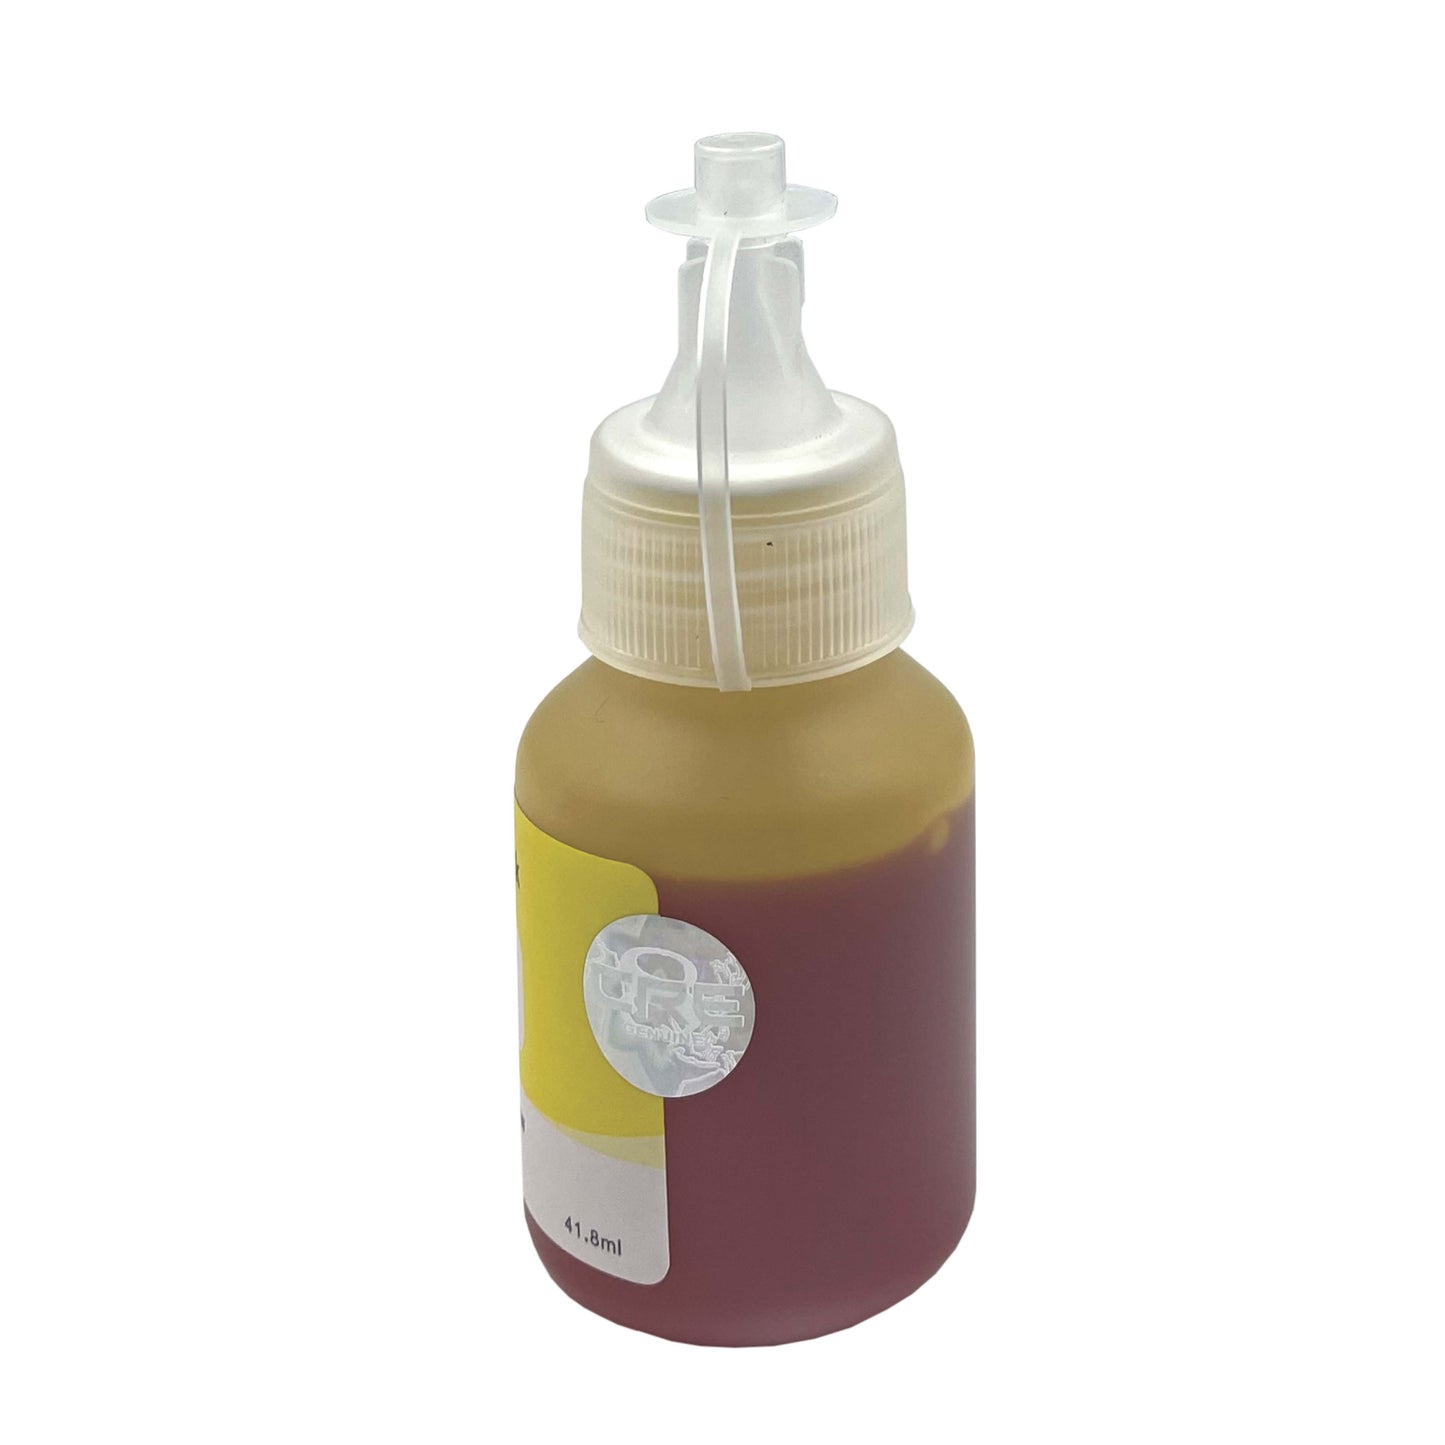 CRE8 | Compatible Brother Yellow Refill Bottle Ink 41.8ml